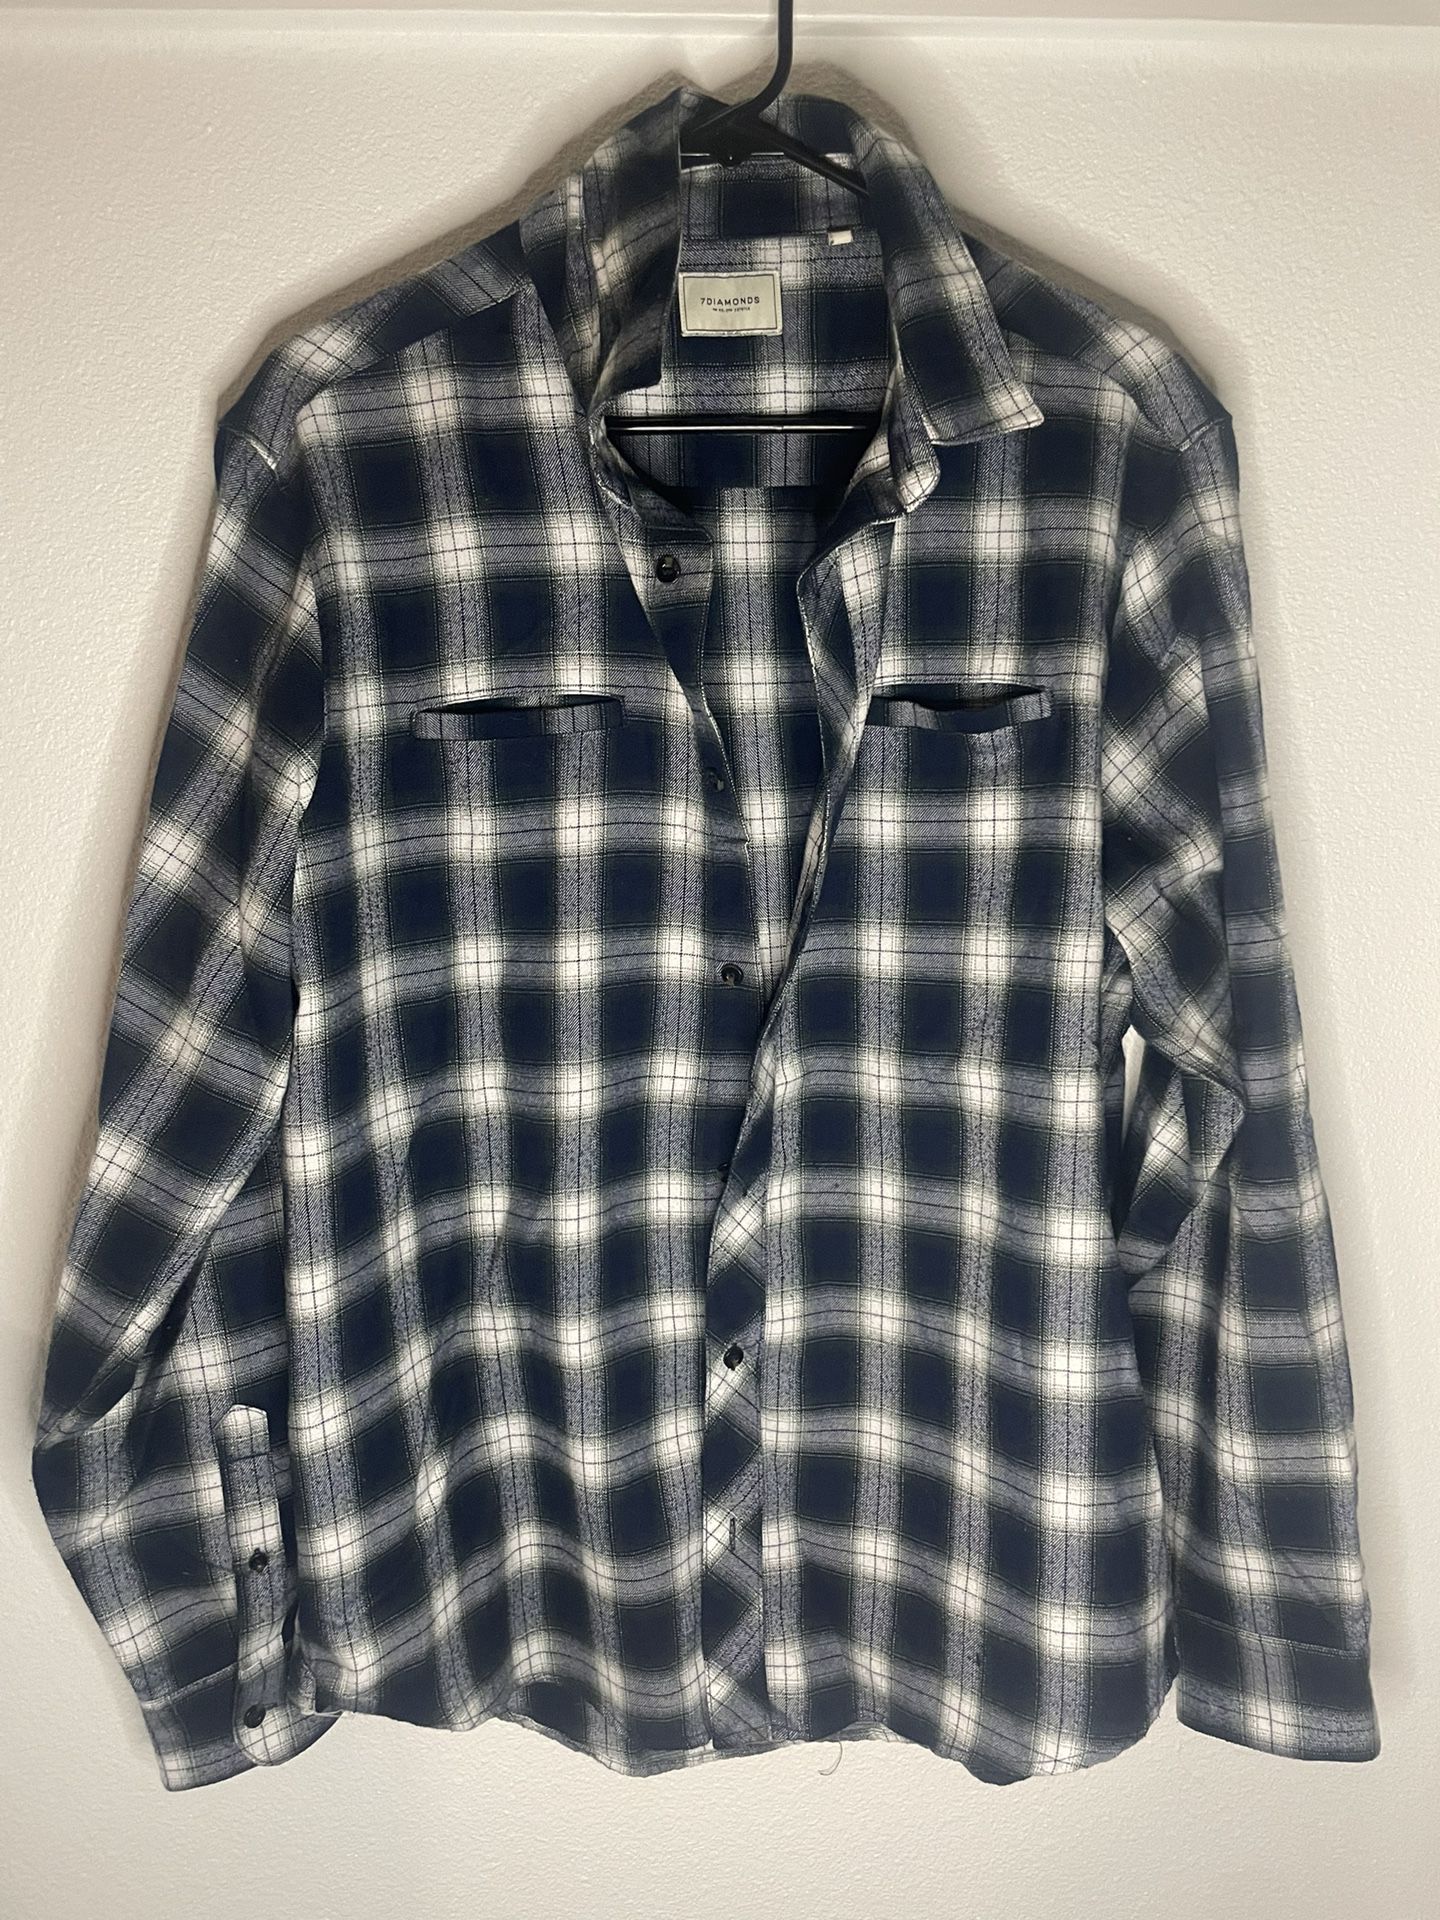 7 Diamonds Mens Navy Flannel $69 for Sale in Lake Grove, OR - OfferUp